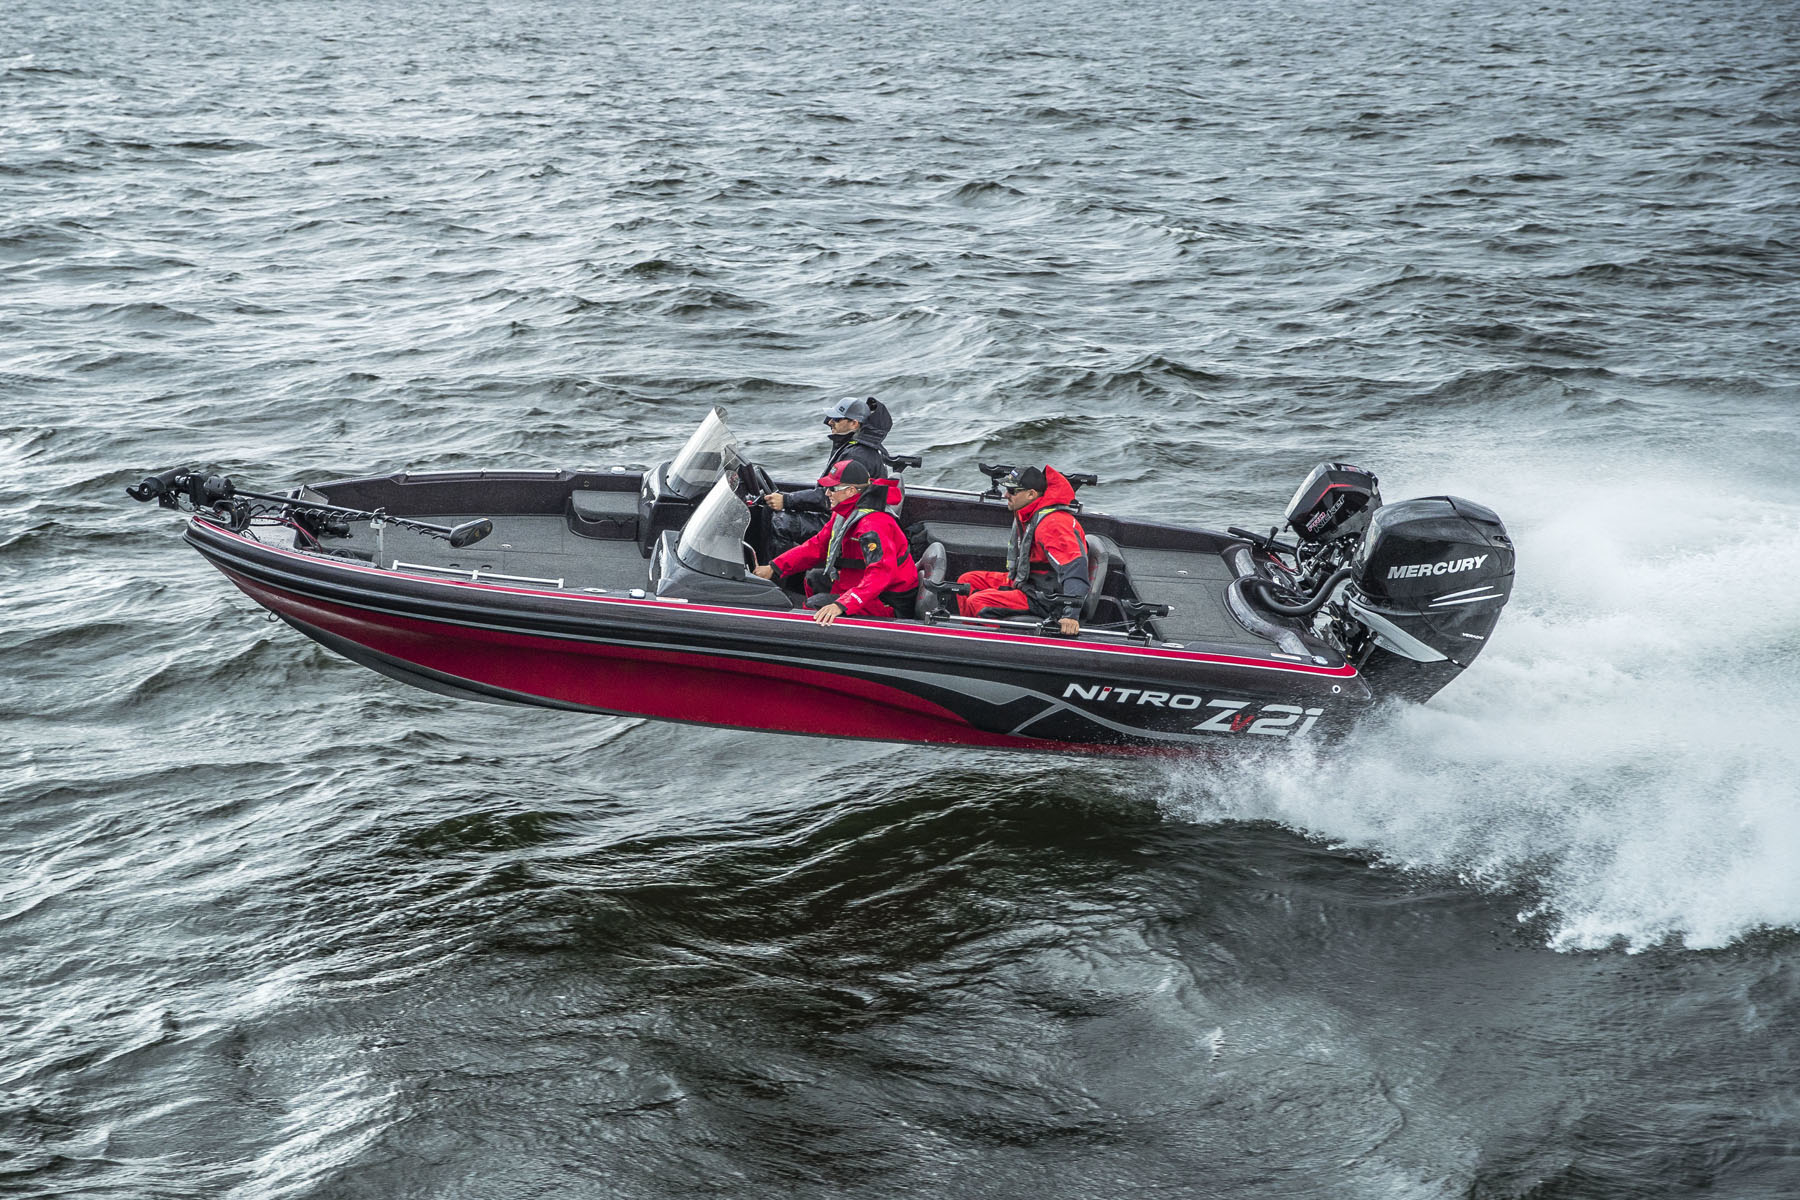 Nitro ZV21: Prices, Specs, Reviews and Sales Information - itBoat